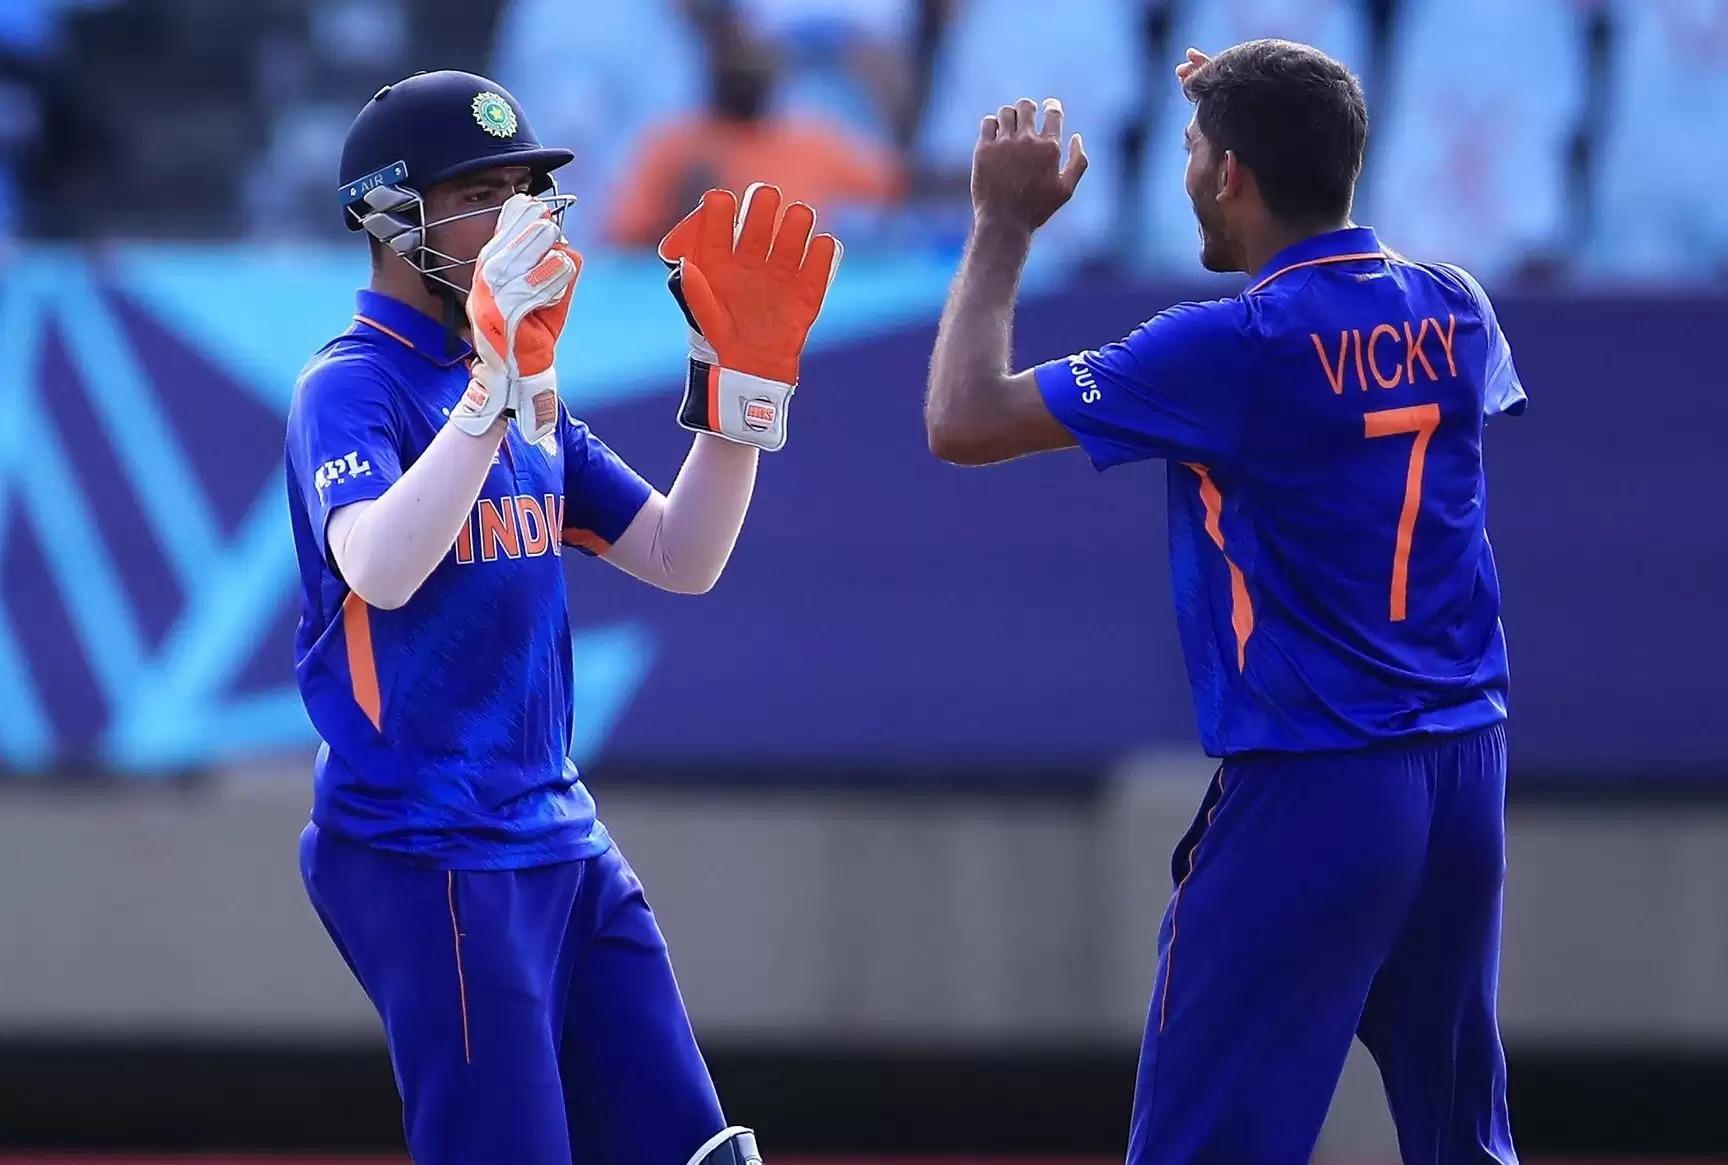 Meet Vicky Ostwal, the India U19 spinner bamboozling batters at the U19 World Cup 2022